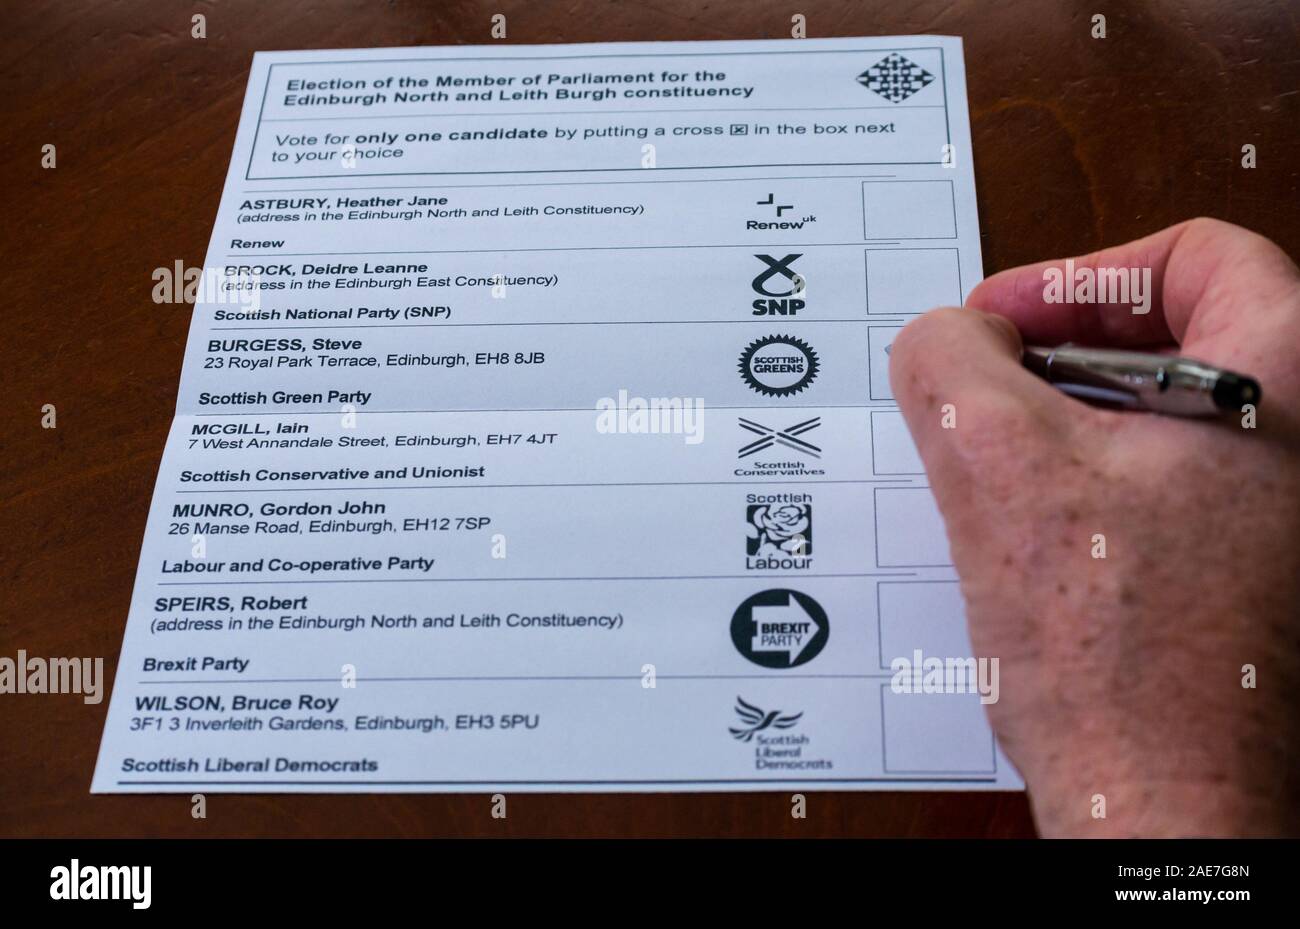 Man voting for Scottish Green Party candidate Steven Burgess on postal ballot in general election 2019 in Edinburgh Leith constituency, Scotland, UK Stock Photo